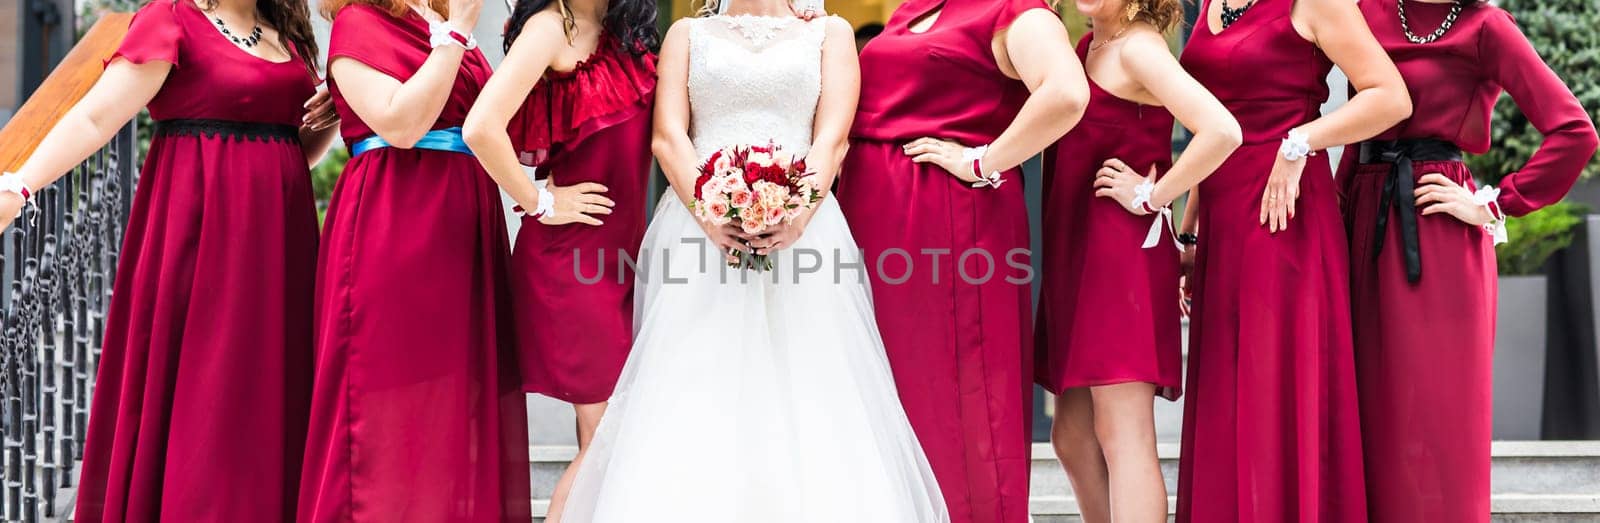 Bride with bridesmaids on the park in wedding day by Satura86